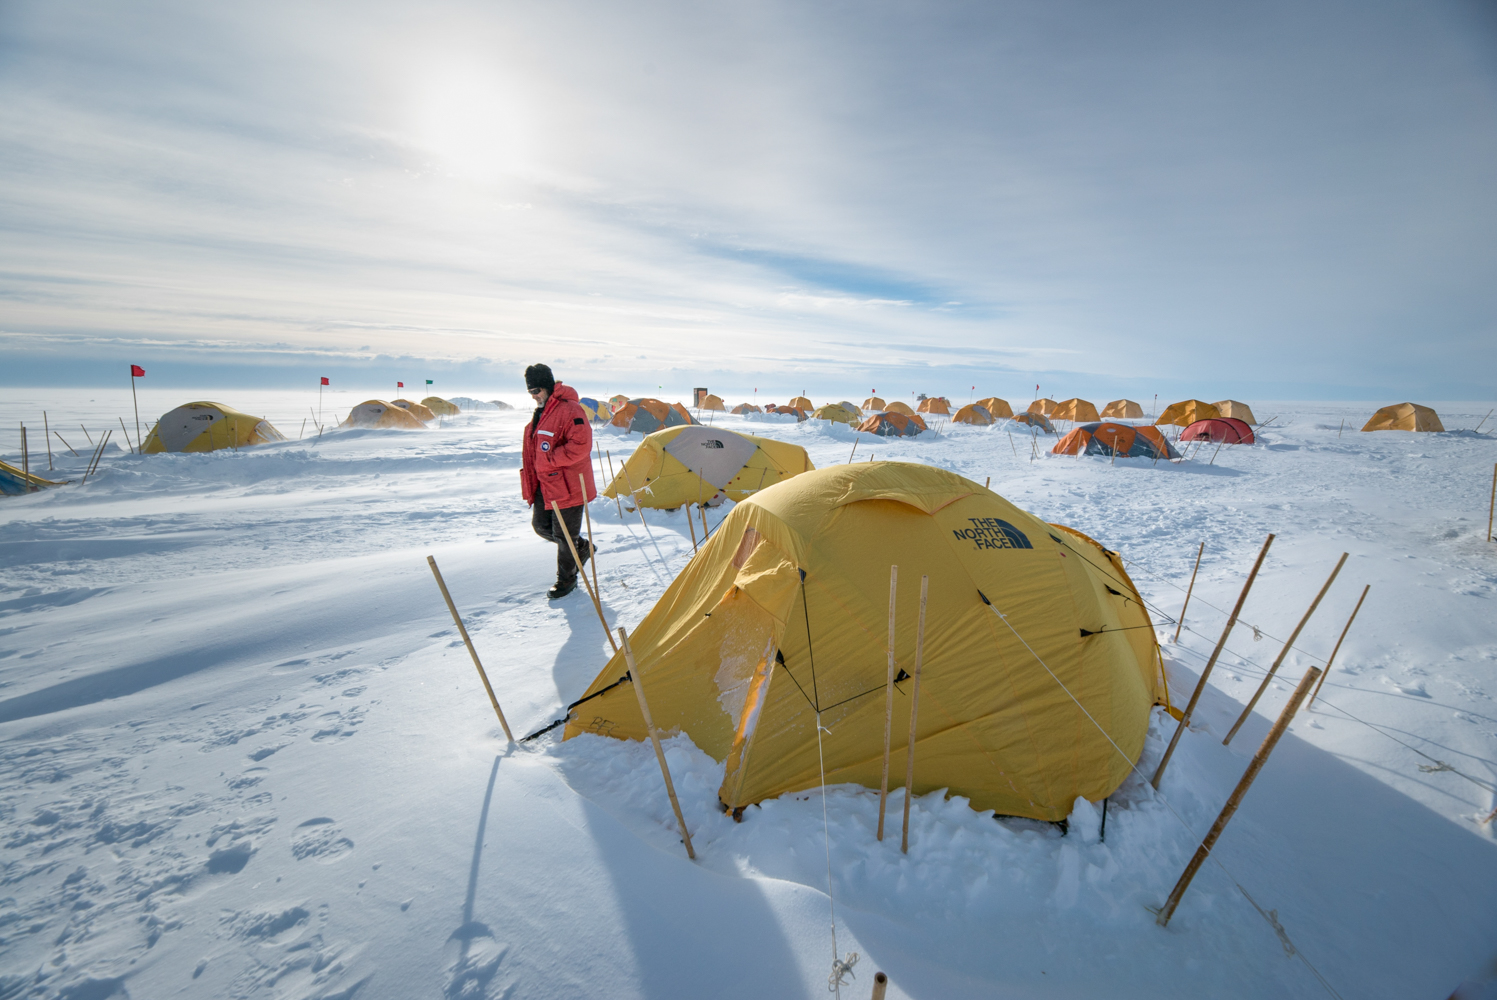 Researchers used large yellow tents as a research station as they filmed a documentary in Antarctica.